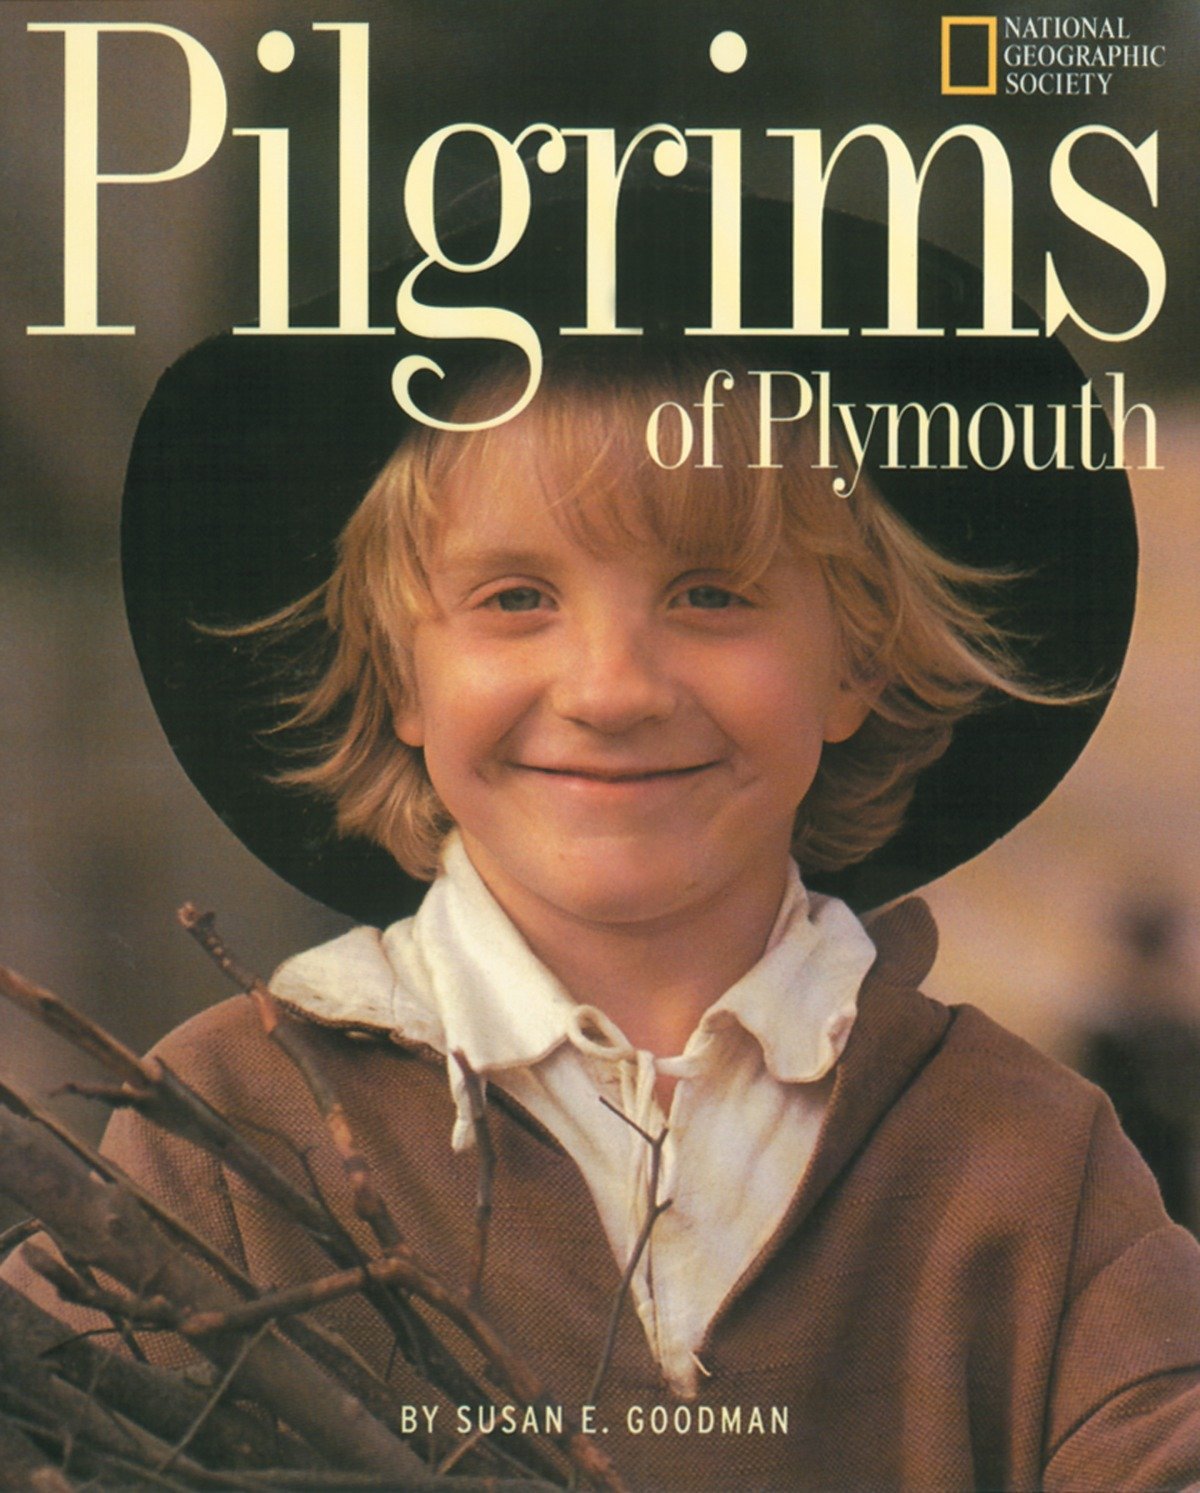 Pilgrims of Plymouth book cover